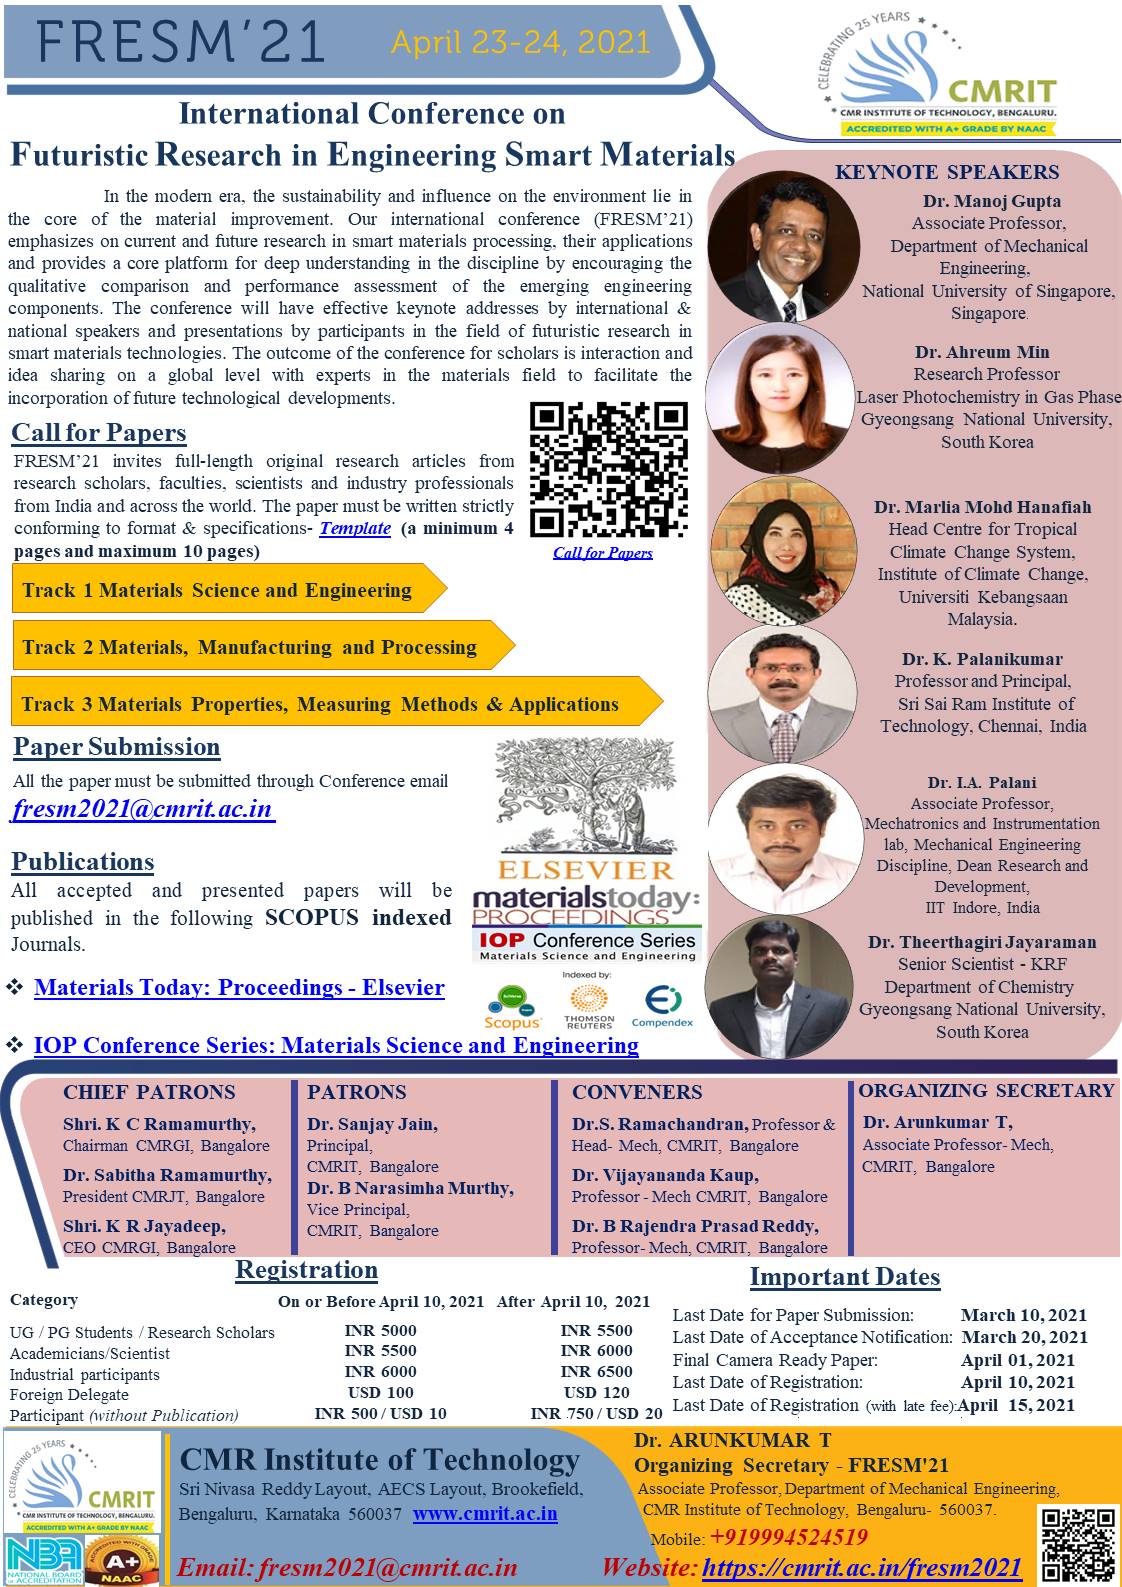 International Conference on Futuristic Research in Engineering Smart Materials FRESM 2021